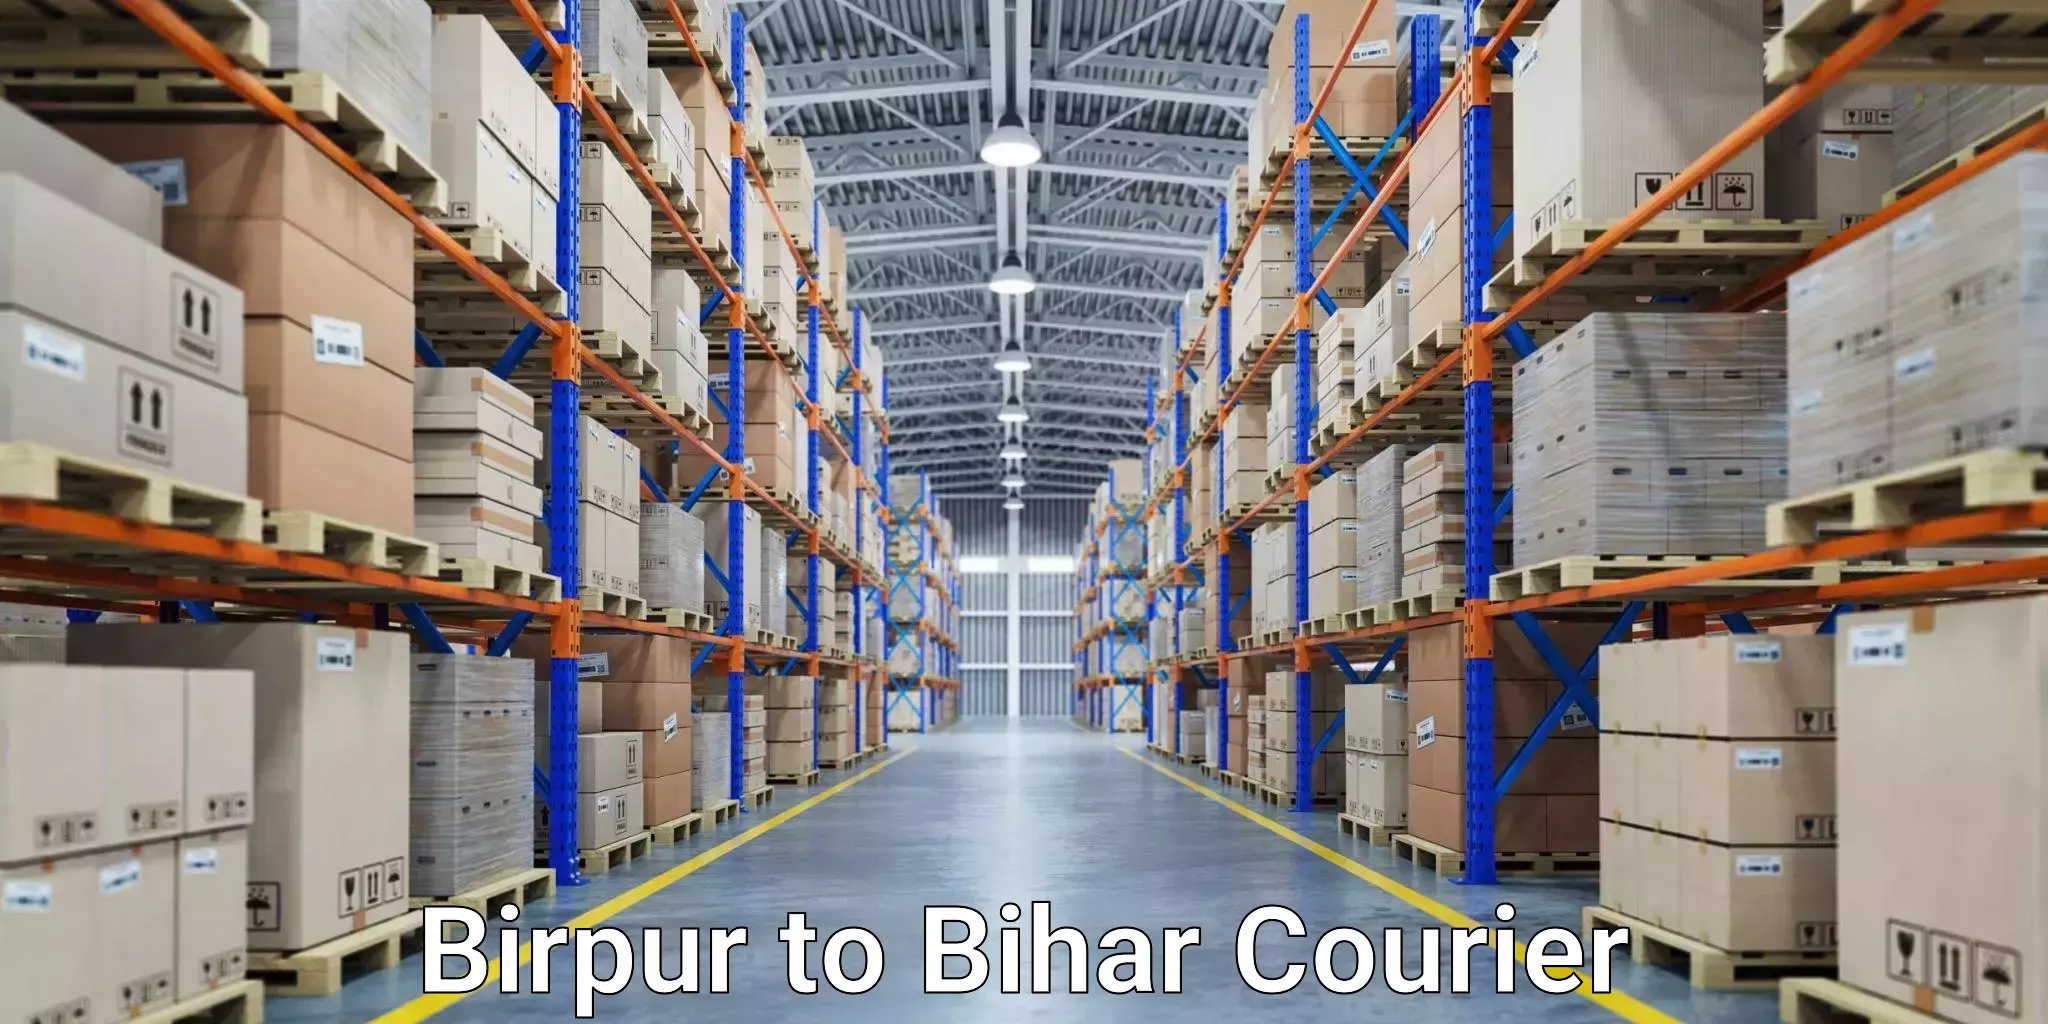 Customizable delivery plans in Birpur to Birpur